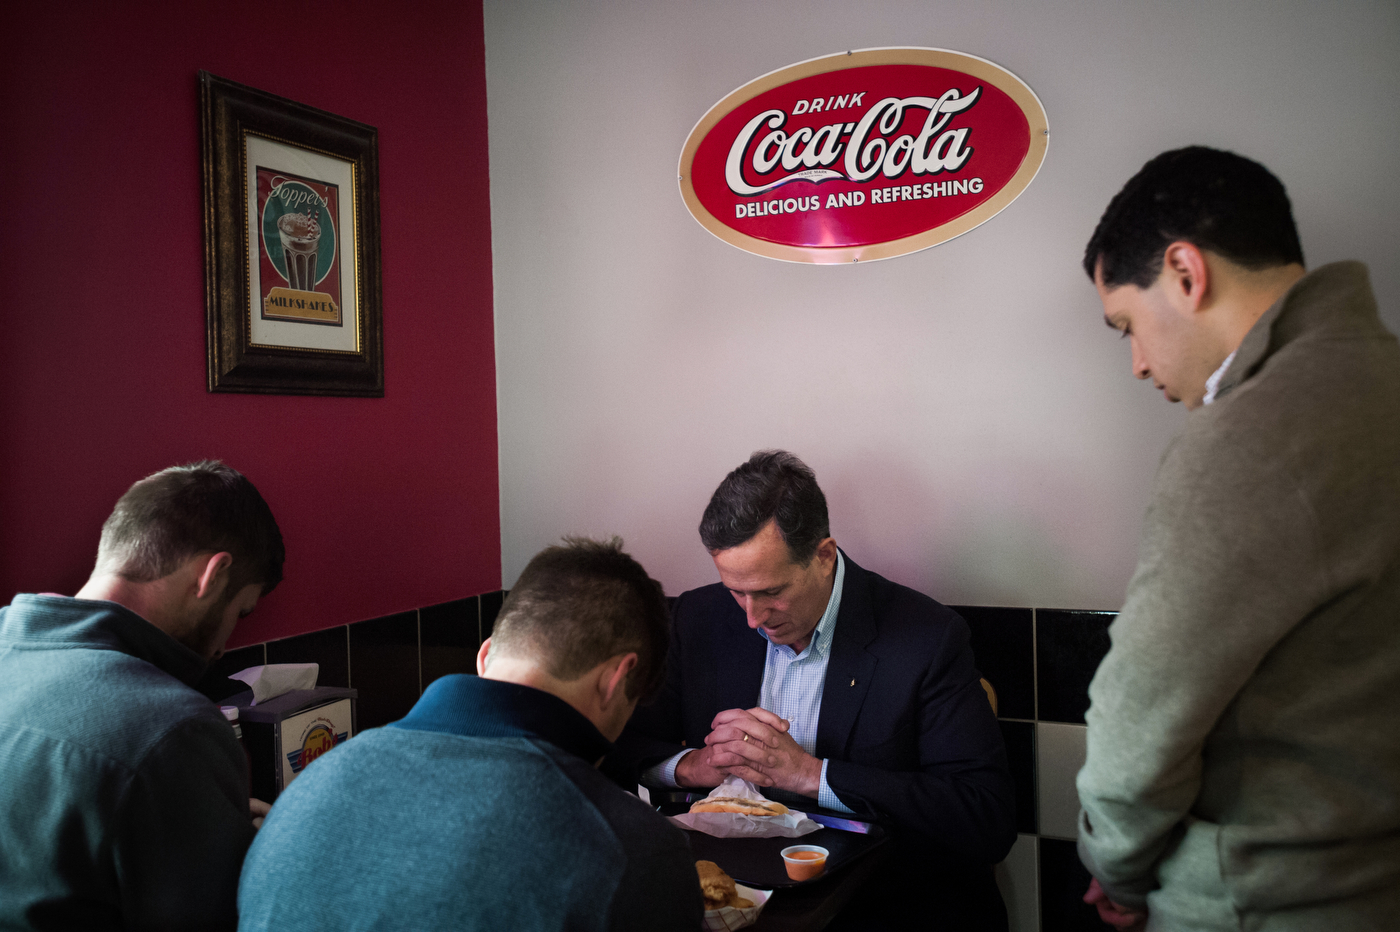  Republican U.S. presidential candidate Rick Santorum prays with members of his campaign staff during lunch between stops in Le Mars, Iowa on October 30, 2015. 